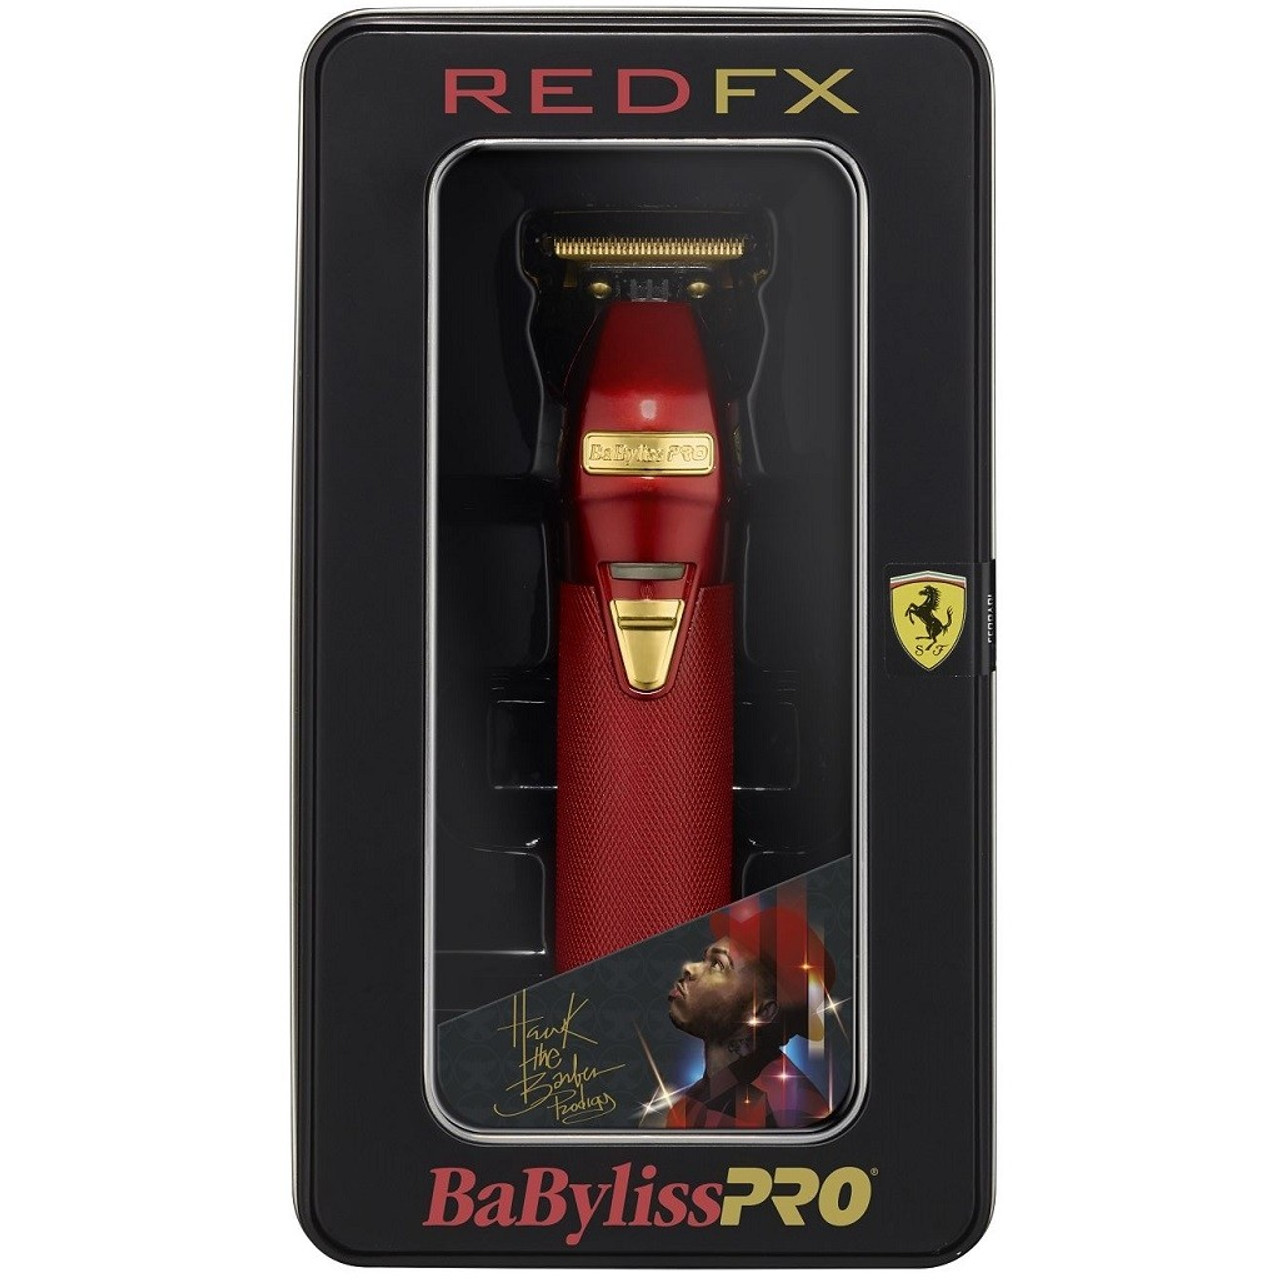 red babyliss trimmer